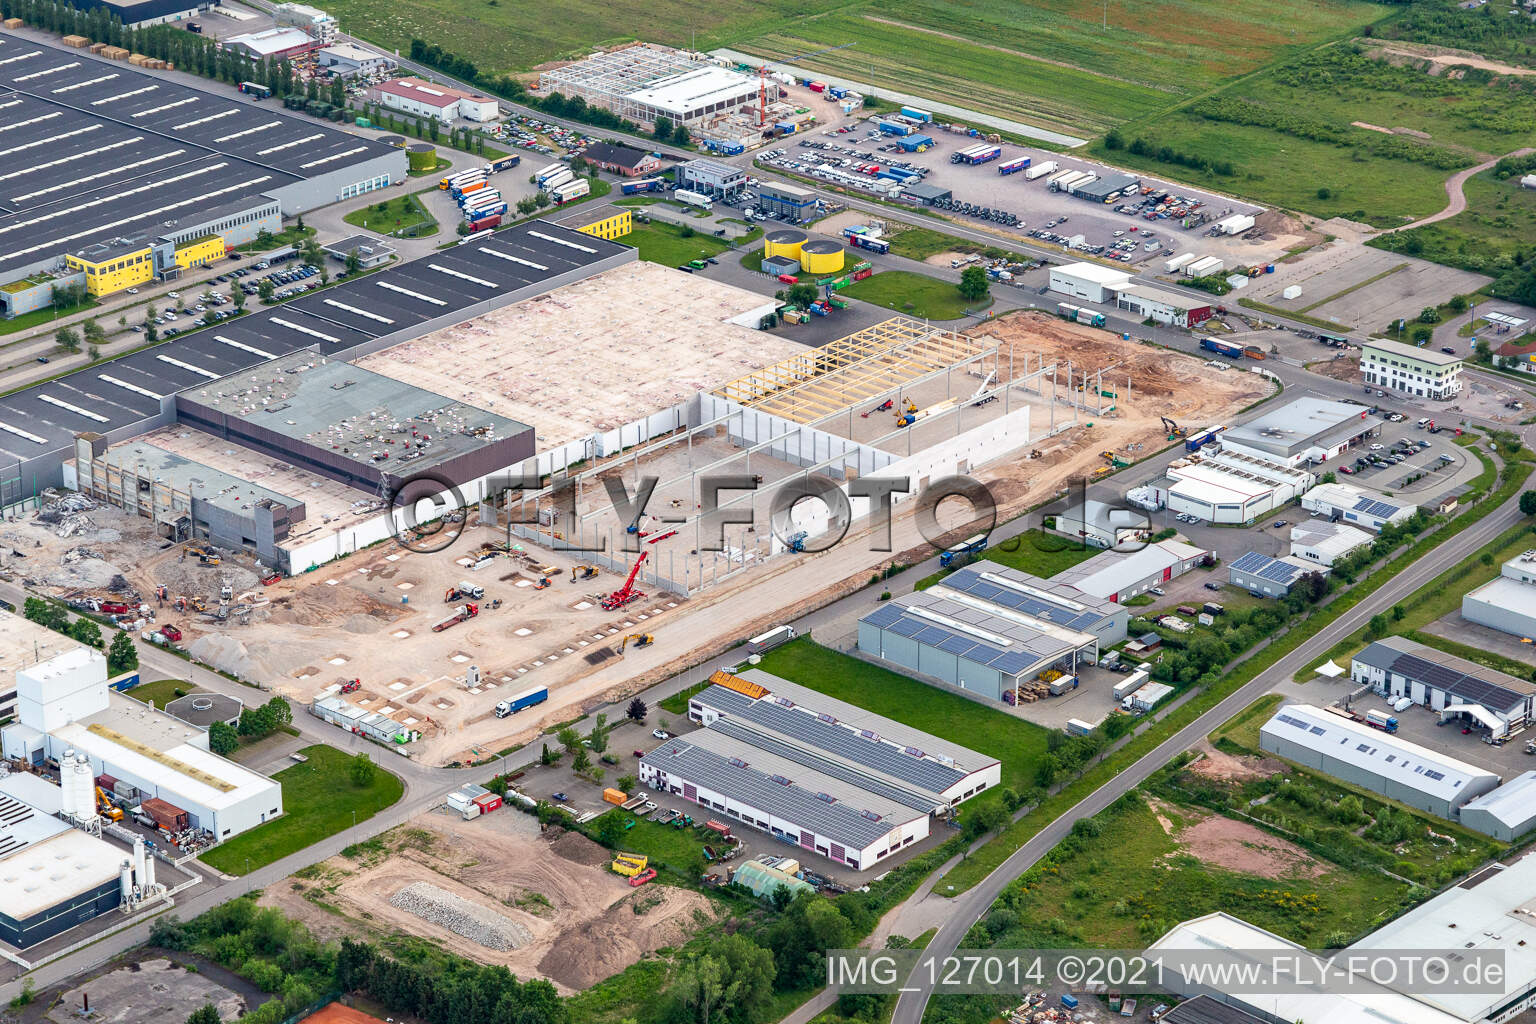 Construction site for a warehouse and forwarding building of Progroup Board GmbH im Interpark in Offenbach an der Queich in the state Rhineland-Palatinate, Germany